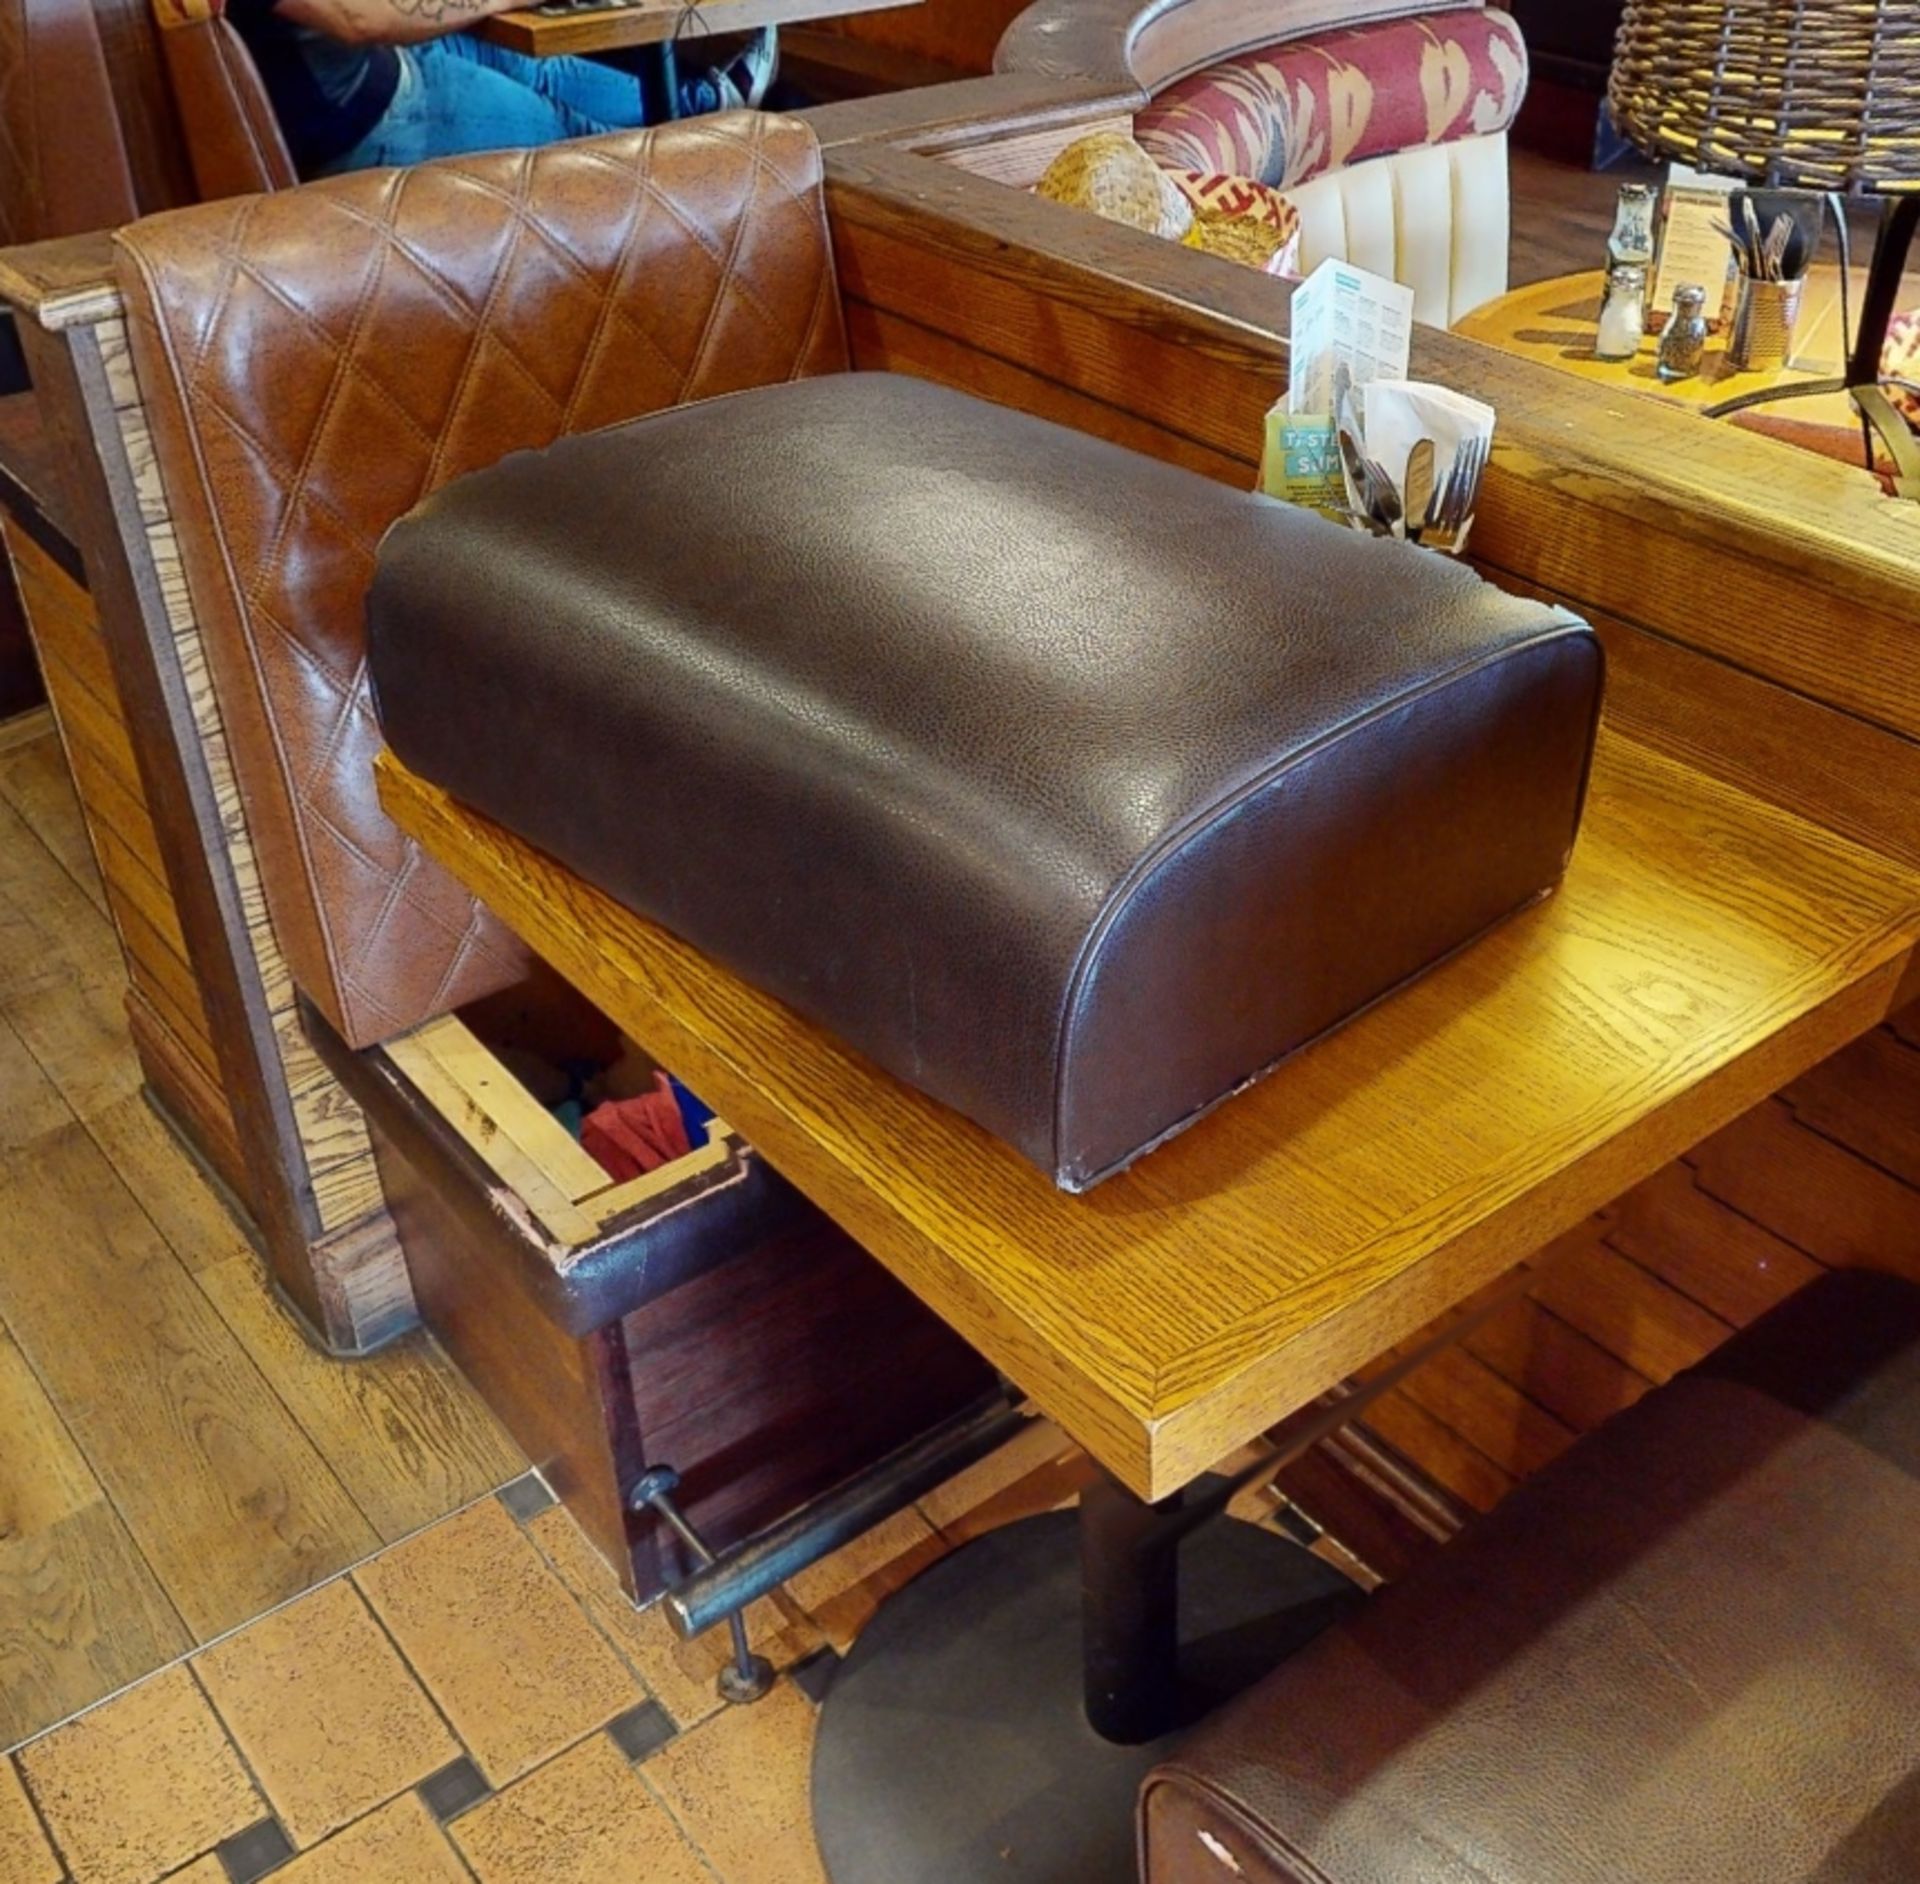 1 x Collection of Restaurant High Single Seat Seating Benches With Footrests - Includes 2 x End - Image 6 of 6